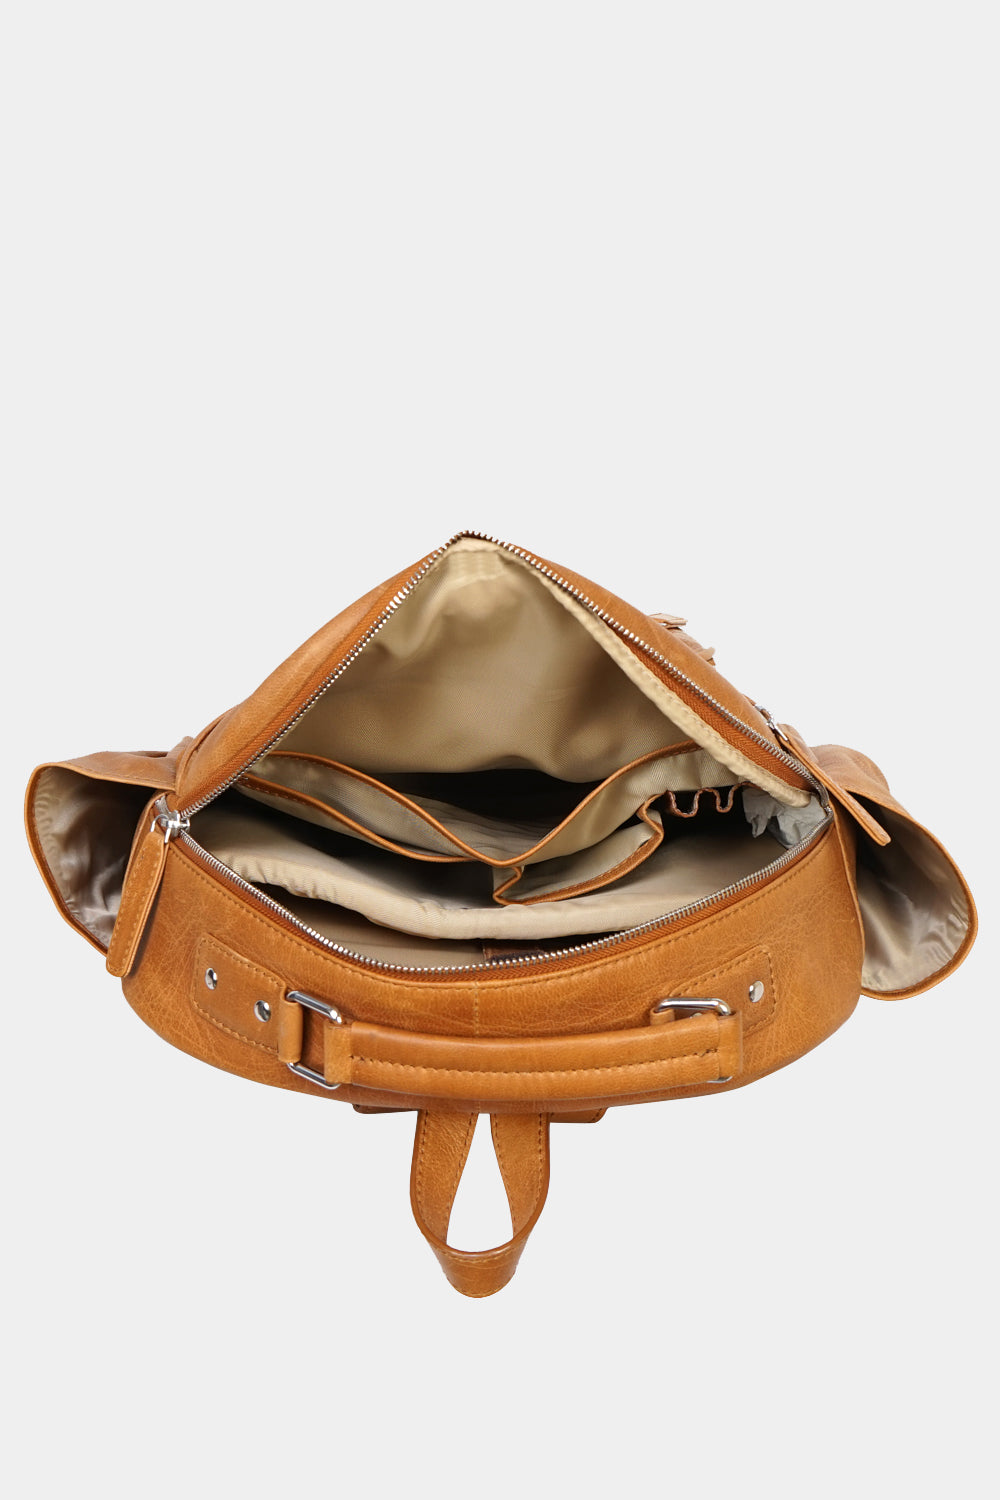 Justanned Crunch Leather Backpack